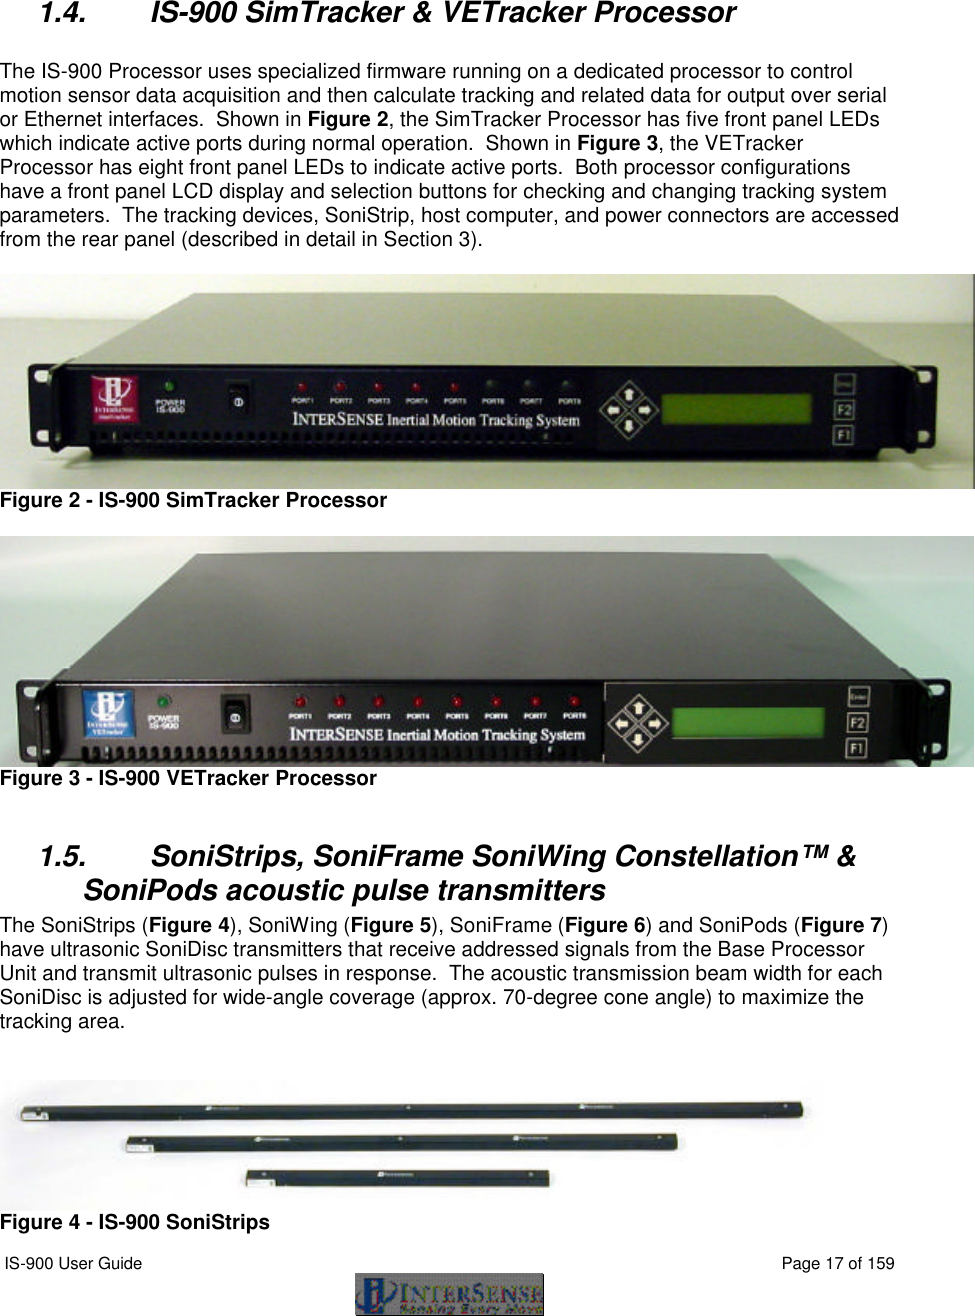  IS-900 User Guide                                                                                                                                          Page 17 of 159     1.4. IS-900 SimTracker &amp; VETracker Processor  The IS-900 Processor uses specialized firmware running on a dedicated processor to control motion sensor data acquisition and then calculate tracking and related data for output over serial or Ethernet interfaces.  Shown in Figure 2, the SimTracker Processor has five front panel LEDs which indicate active ports during normal operation.  Shown in Figure 3, the VETracker Processor has eight front panel LEDs to indicate active ports.  Both processor configurations have a front panel LCD display and selection buttons for checking and changing tracking system parameters.  The tracking devices, SoniStrip, host computer, and power connectors are accessed from the rear panel (described in detail in Section 3).   Figure 2 - IS-900 SimTracker Processor   Figure 3 - IS-900 VETracker Processor  1.5. SoniStrips, SoniFrame SoniWing Constellation™ &amp; SoniPods acoustic pulse transmitters The SoniStrips (Figure 4), SoniWing (Figure 5), SoniFrame (Figure 6) and SoniPods (Figure 7) have ultrasonic SoniDisc transmitters that receive addressed signals from the Base Processor Unit and transmit ultrasonic pulses in response.  The acoustic transmission beam width for each SoniDisc is adjusted for wide-angle coverage (approx. 70-degree cone angle) to maximize the tracking area.    Figure 4 - IS-900 SoniStrips 